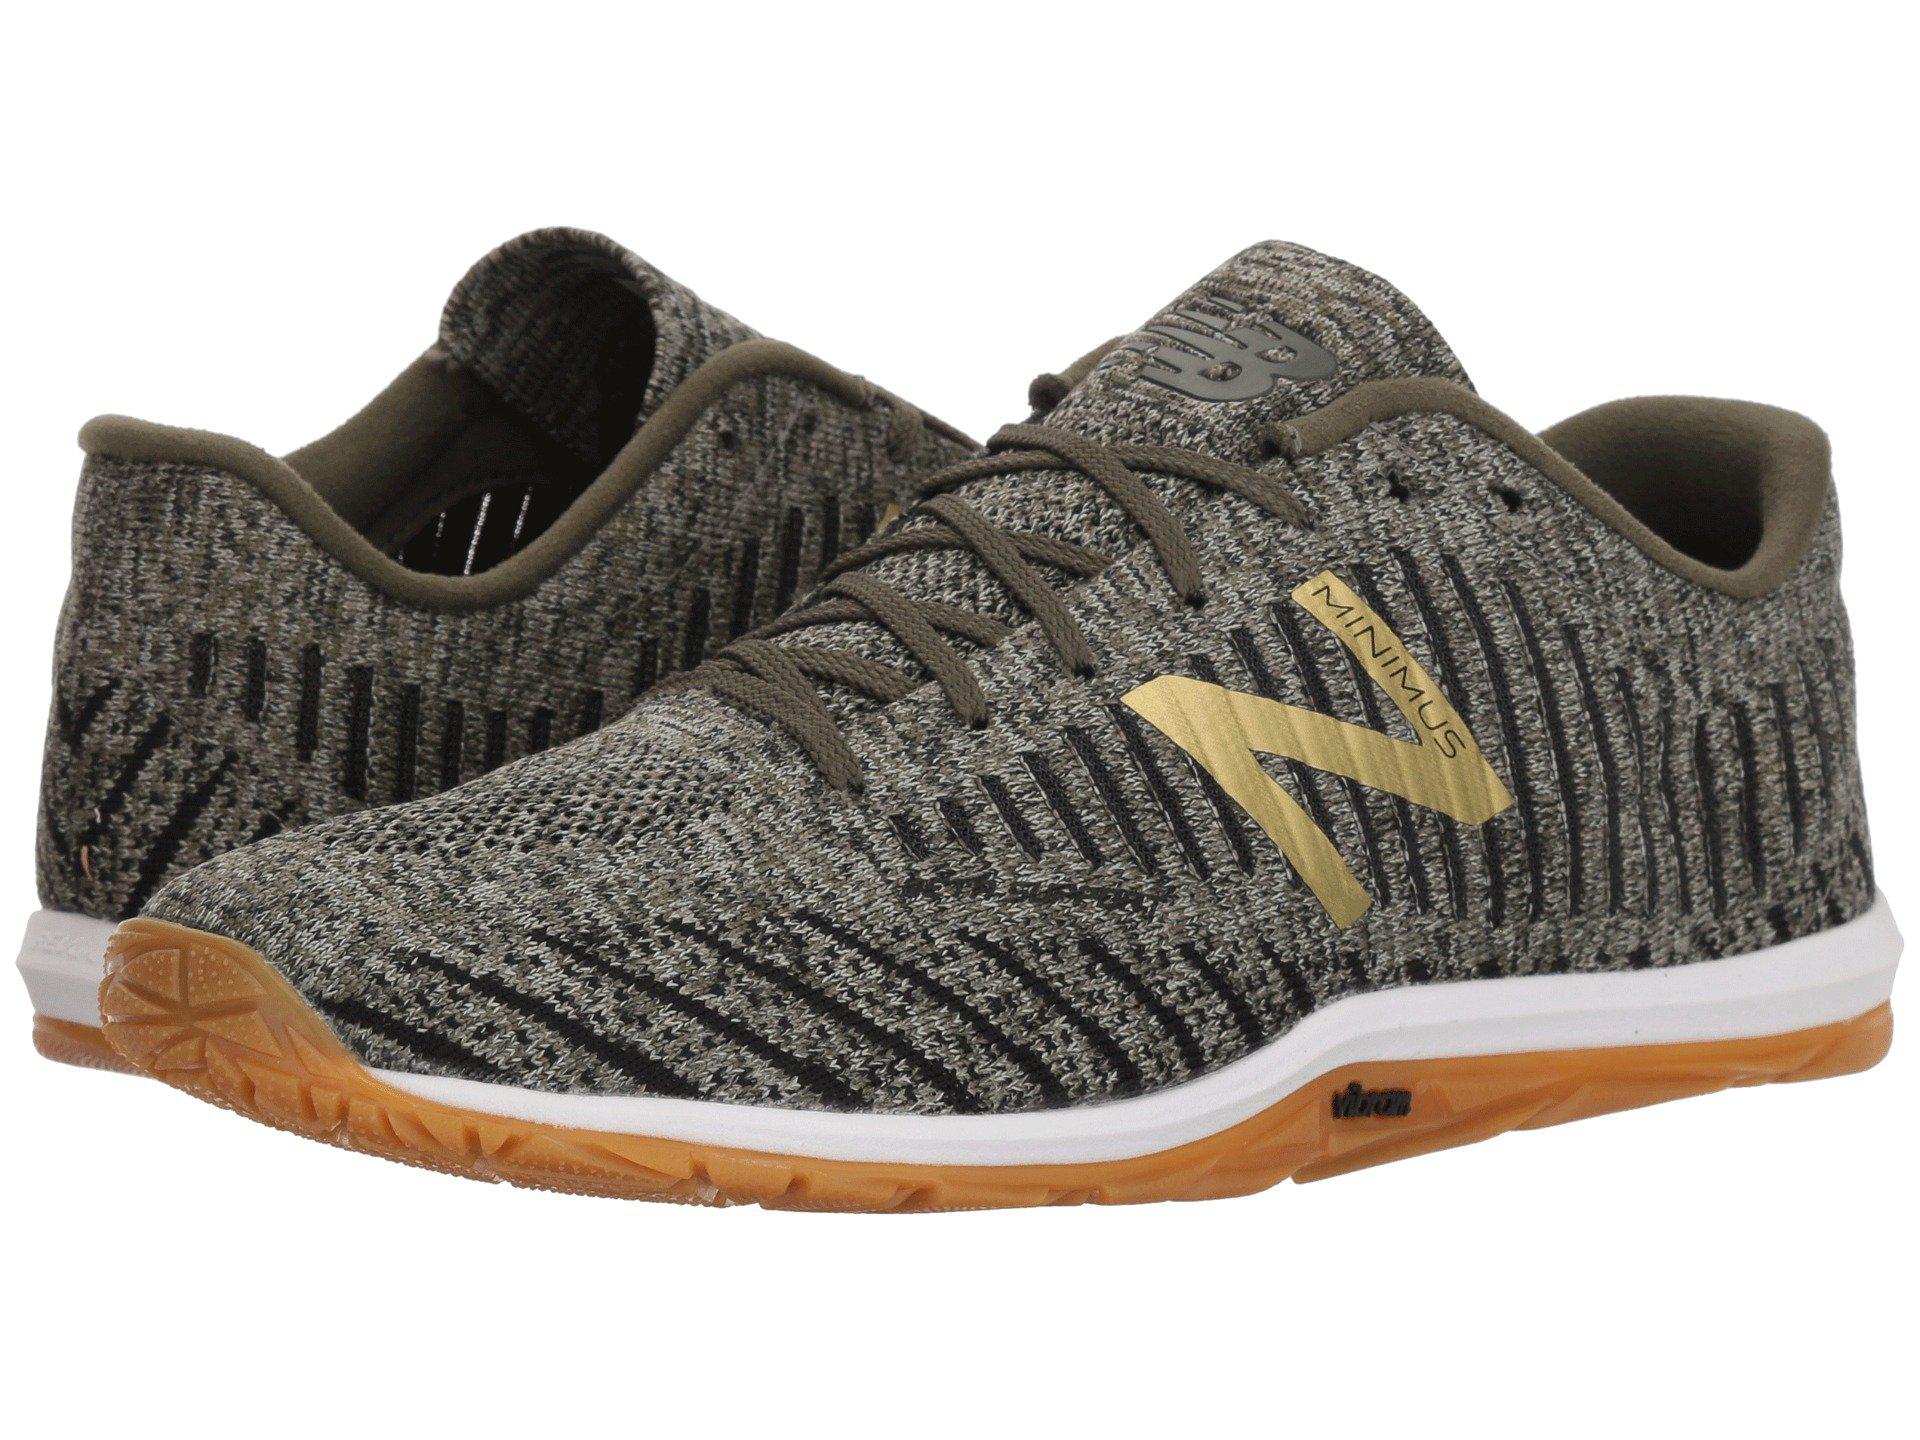 New Balance Synthetic Minimus 20v7 Trainer for Men - Lyst